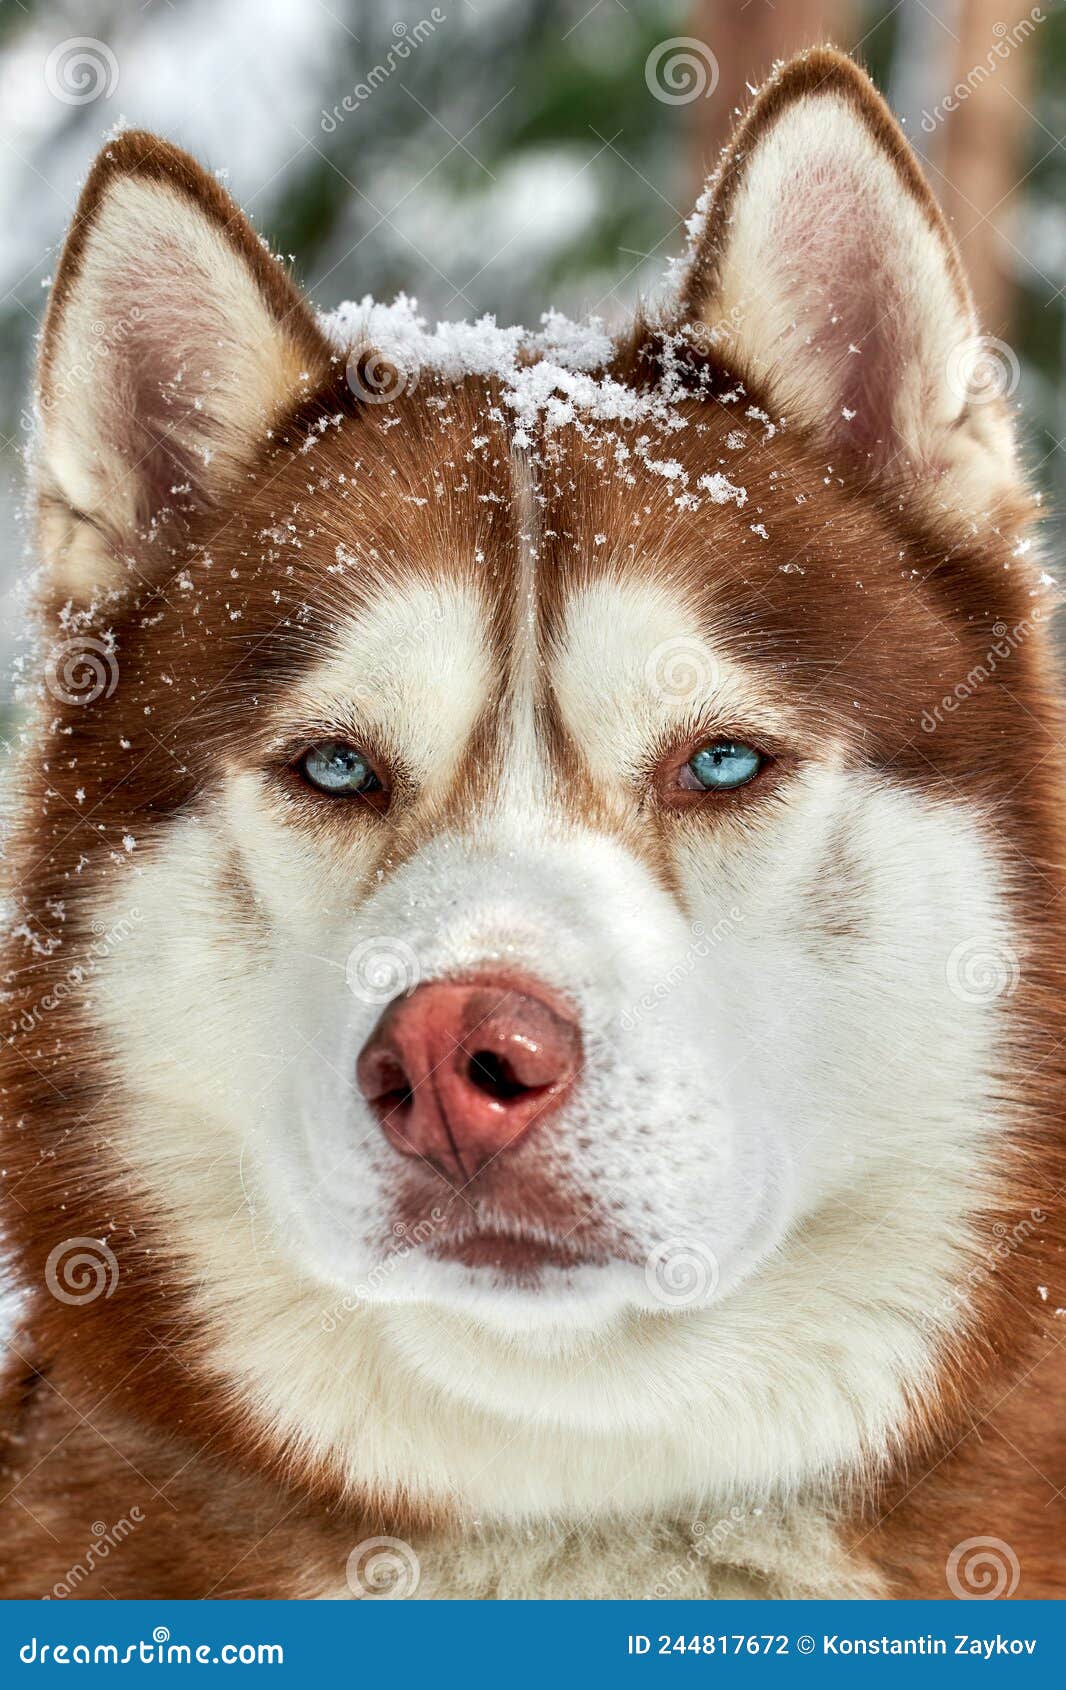 Siberian Husky Dog Portrait Close Up, Siberian Husky Head Front with Red Brown Coat Color and Eyes, Dog Stock Photo - Image of cute, doggy: 244817672